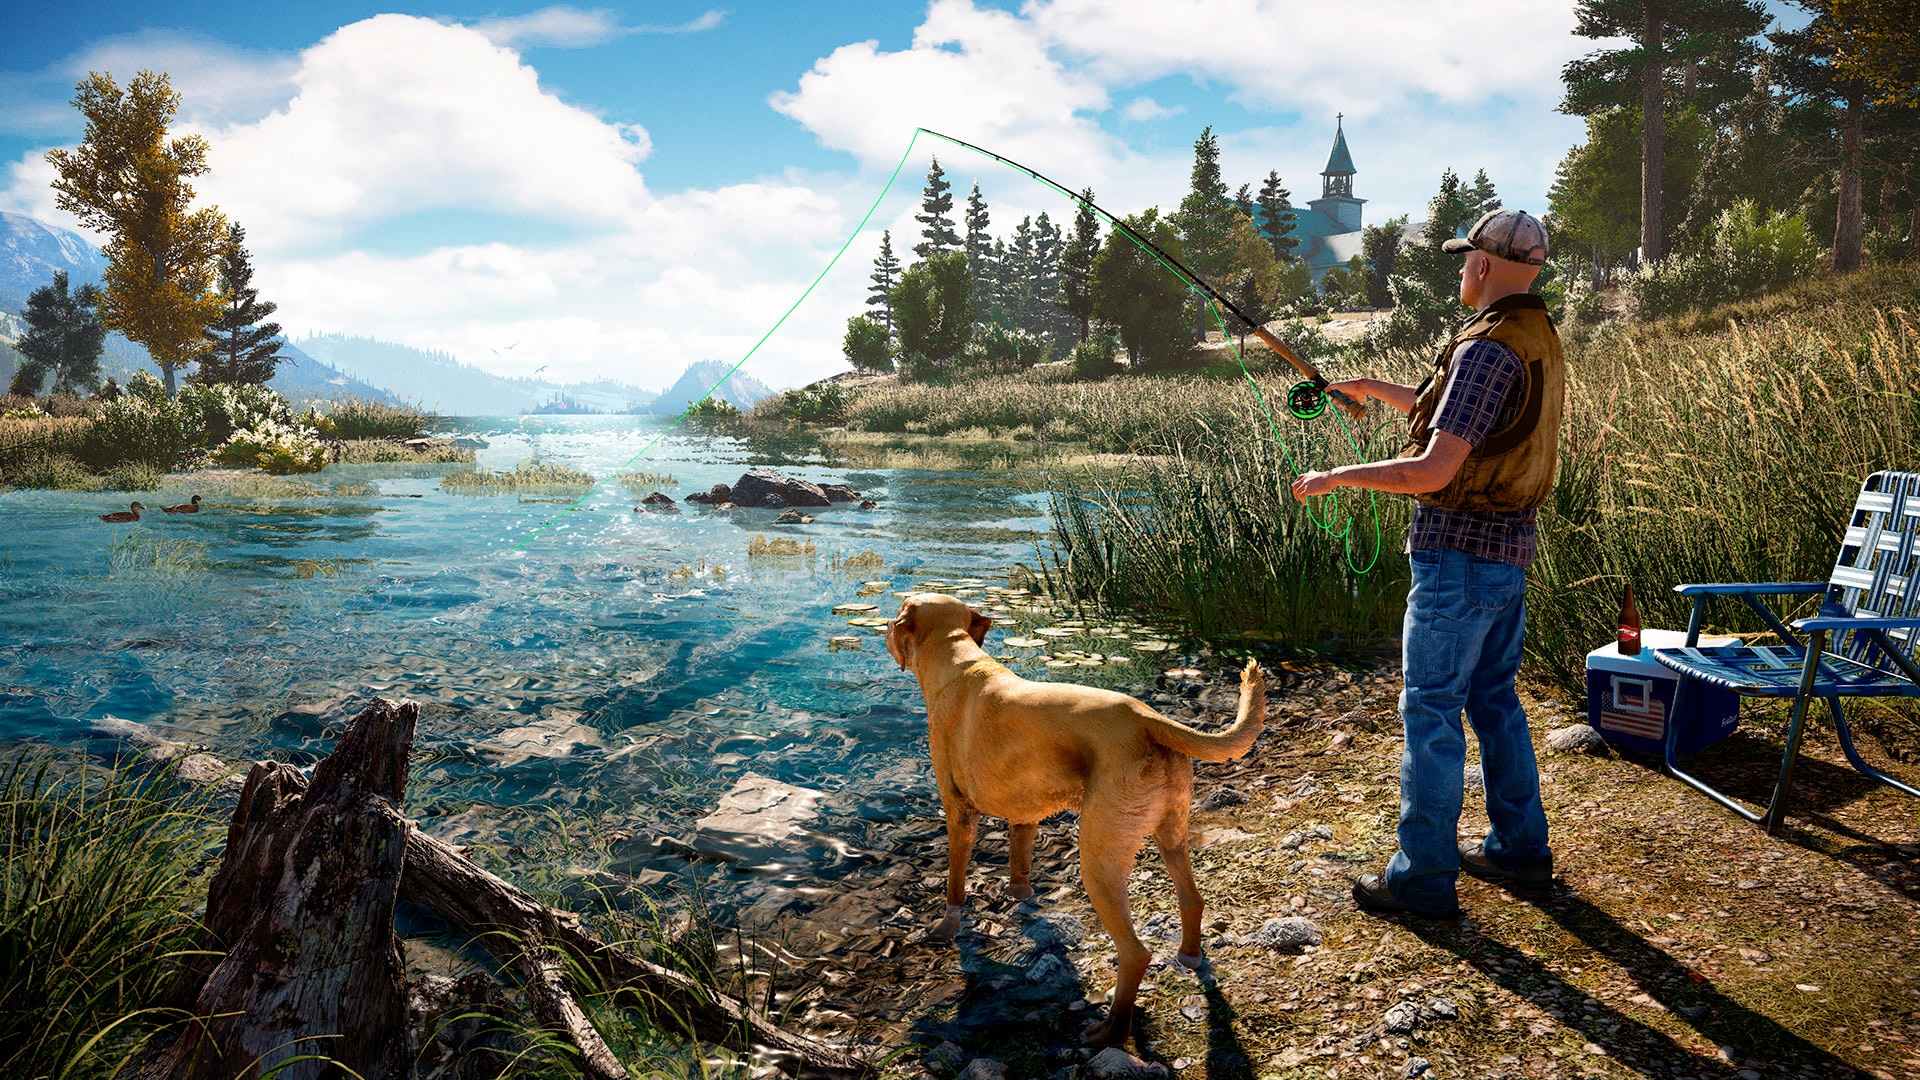 Sunny day with a fishing man and his dog